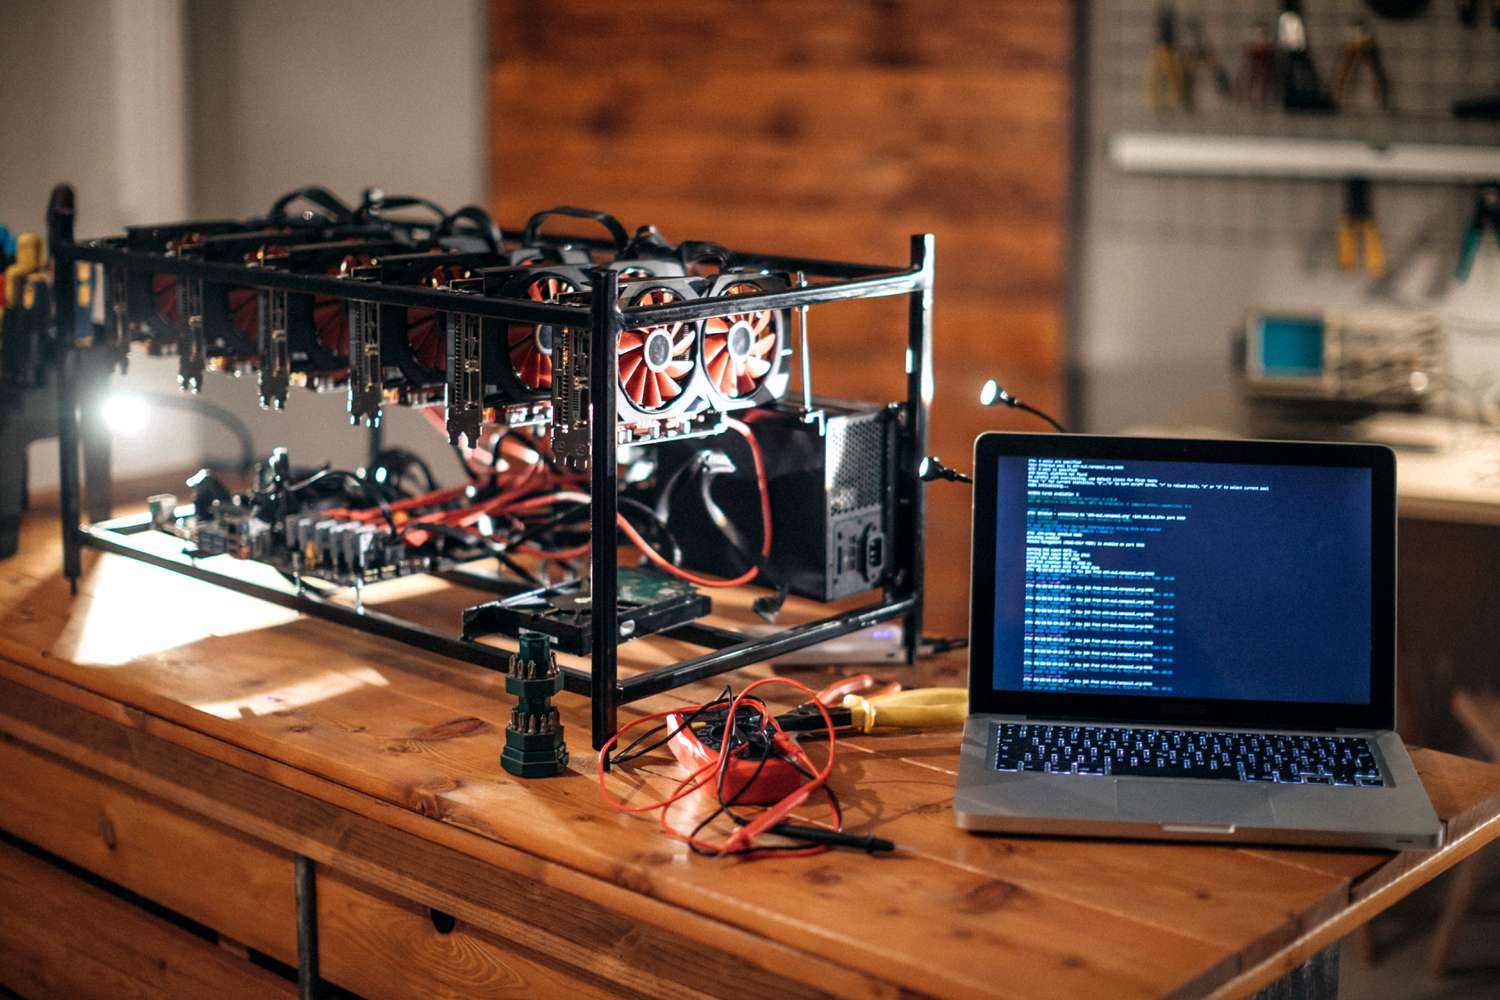 Ethereum Mining Rig: Things to Know When Building One